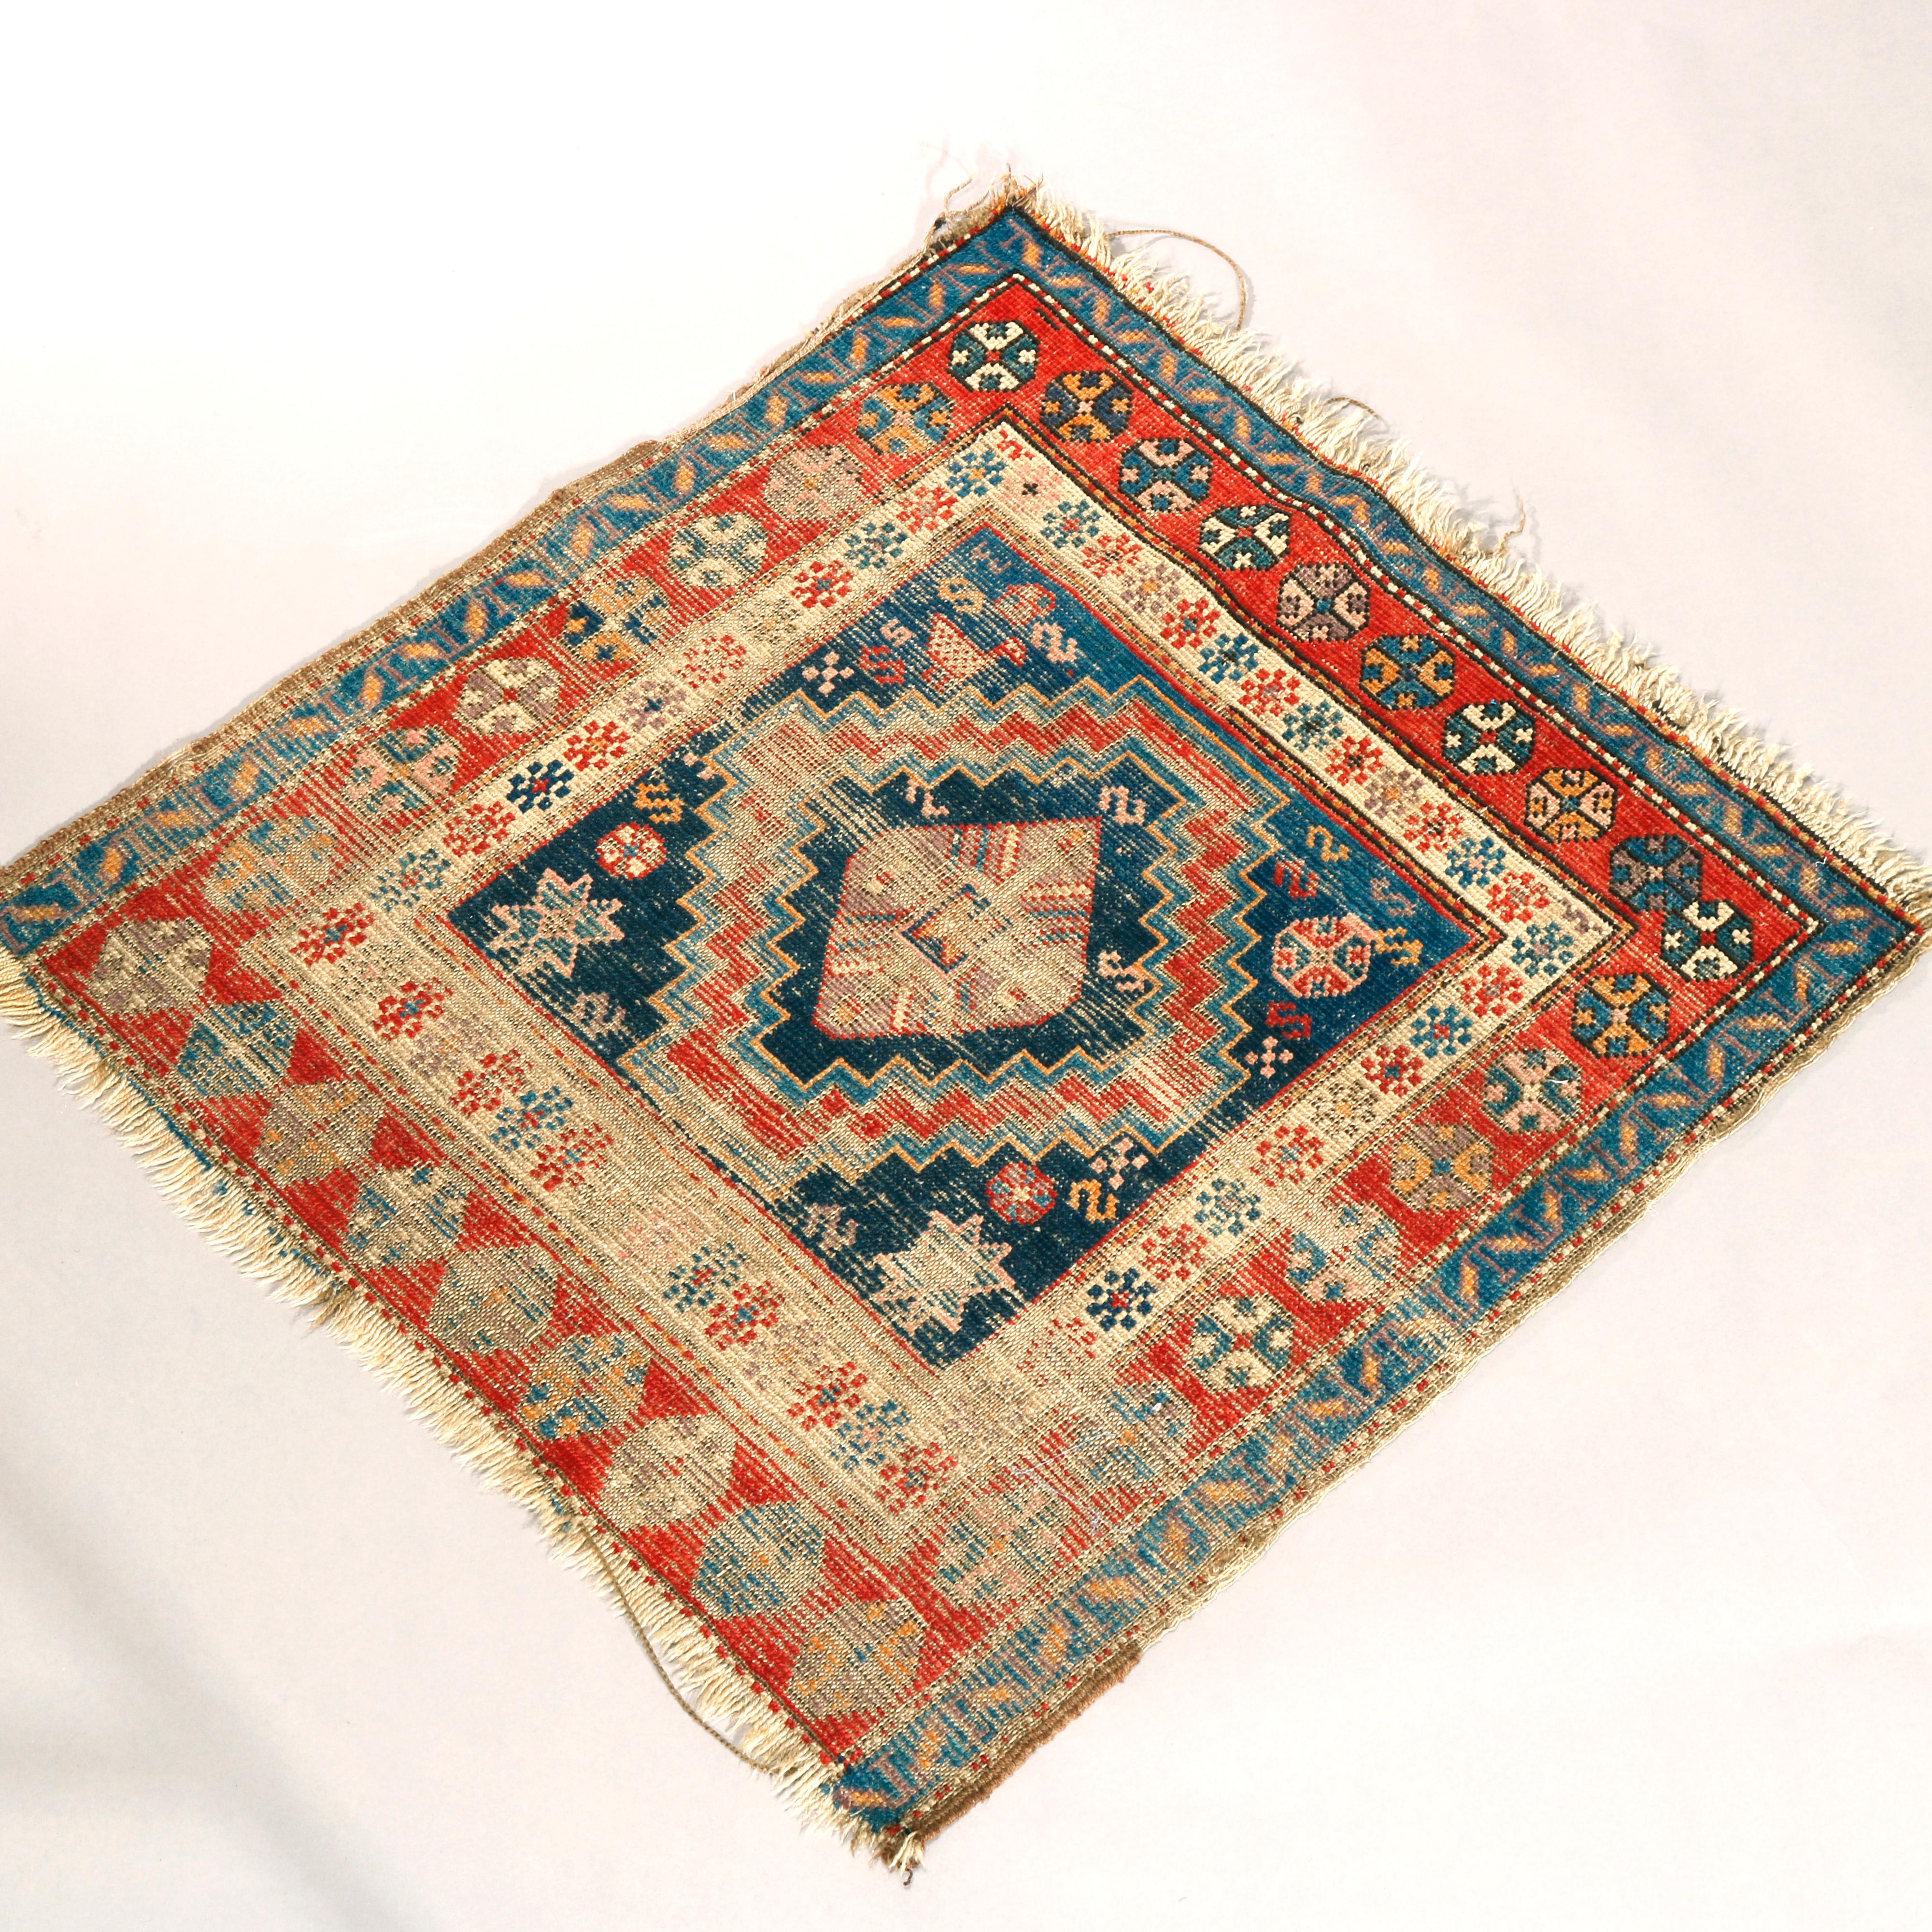 An antique Kurdish oriental mat offers wool construction having serrated geometric central medallion with geometric elements including stars on blue ground, circa 1890

Measures: 38